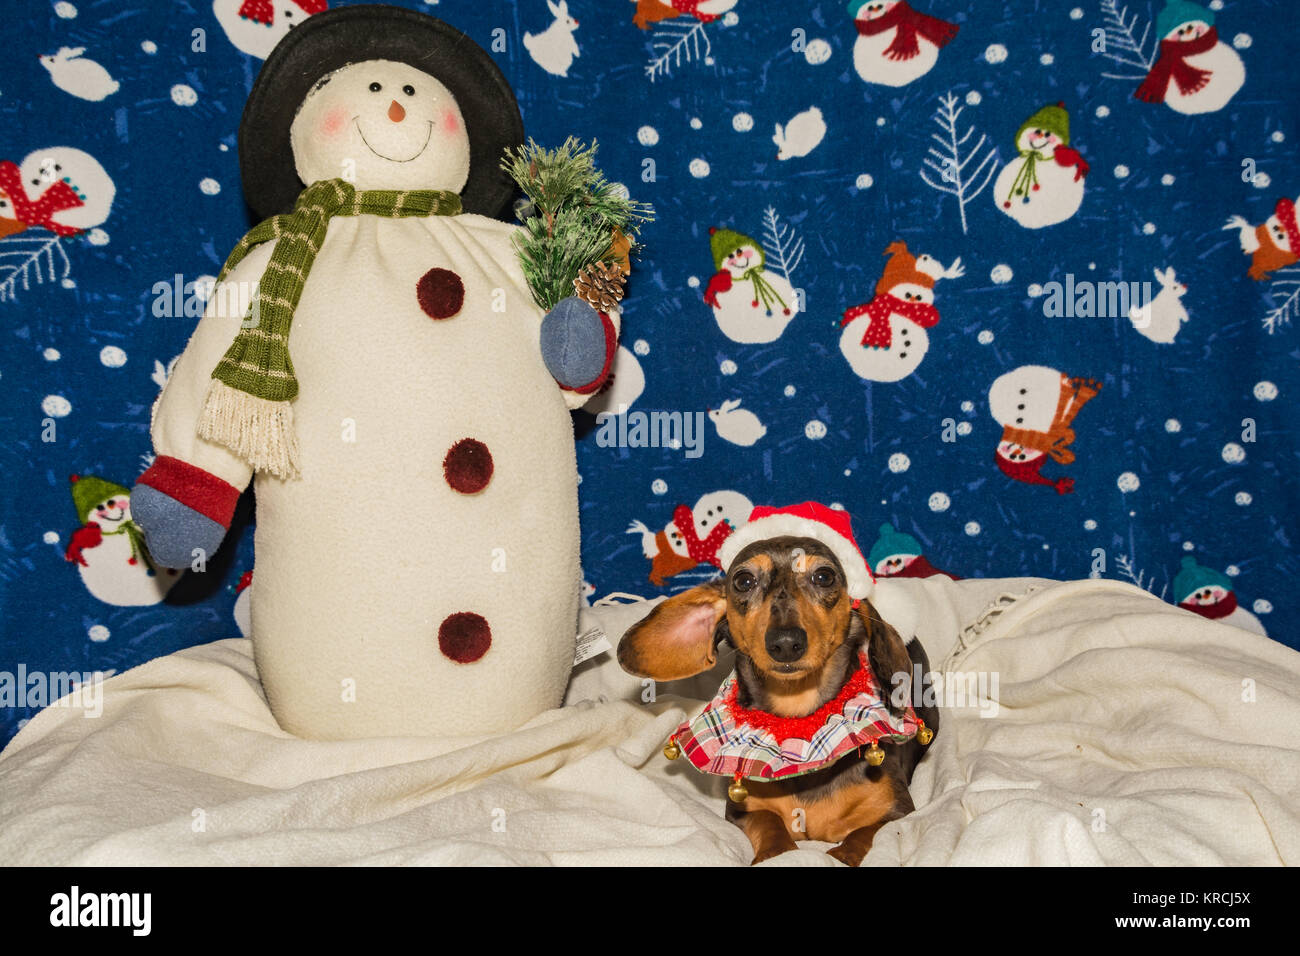 A cute Dachshund puppy wearing a Santa hat for Christmas. Stock Photo